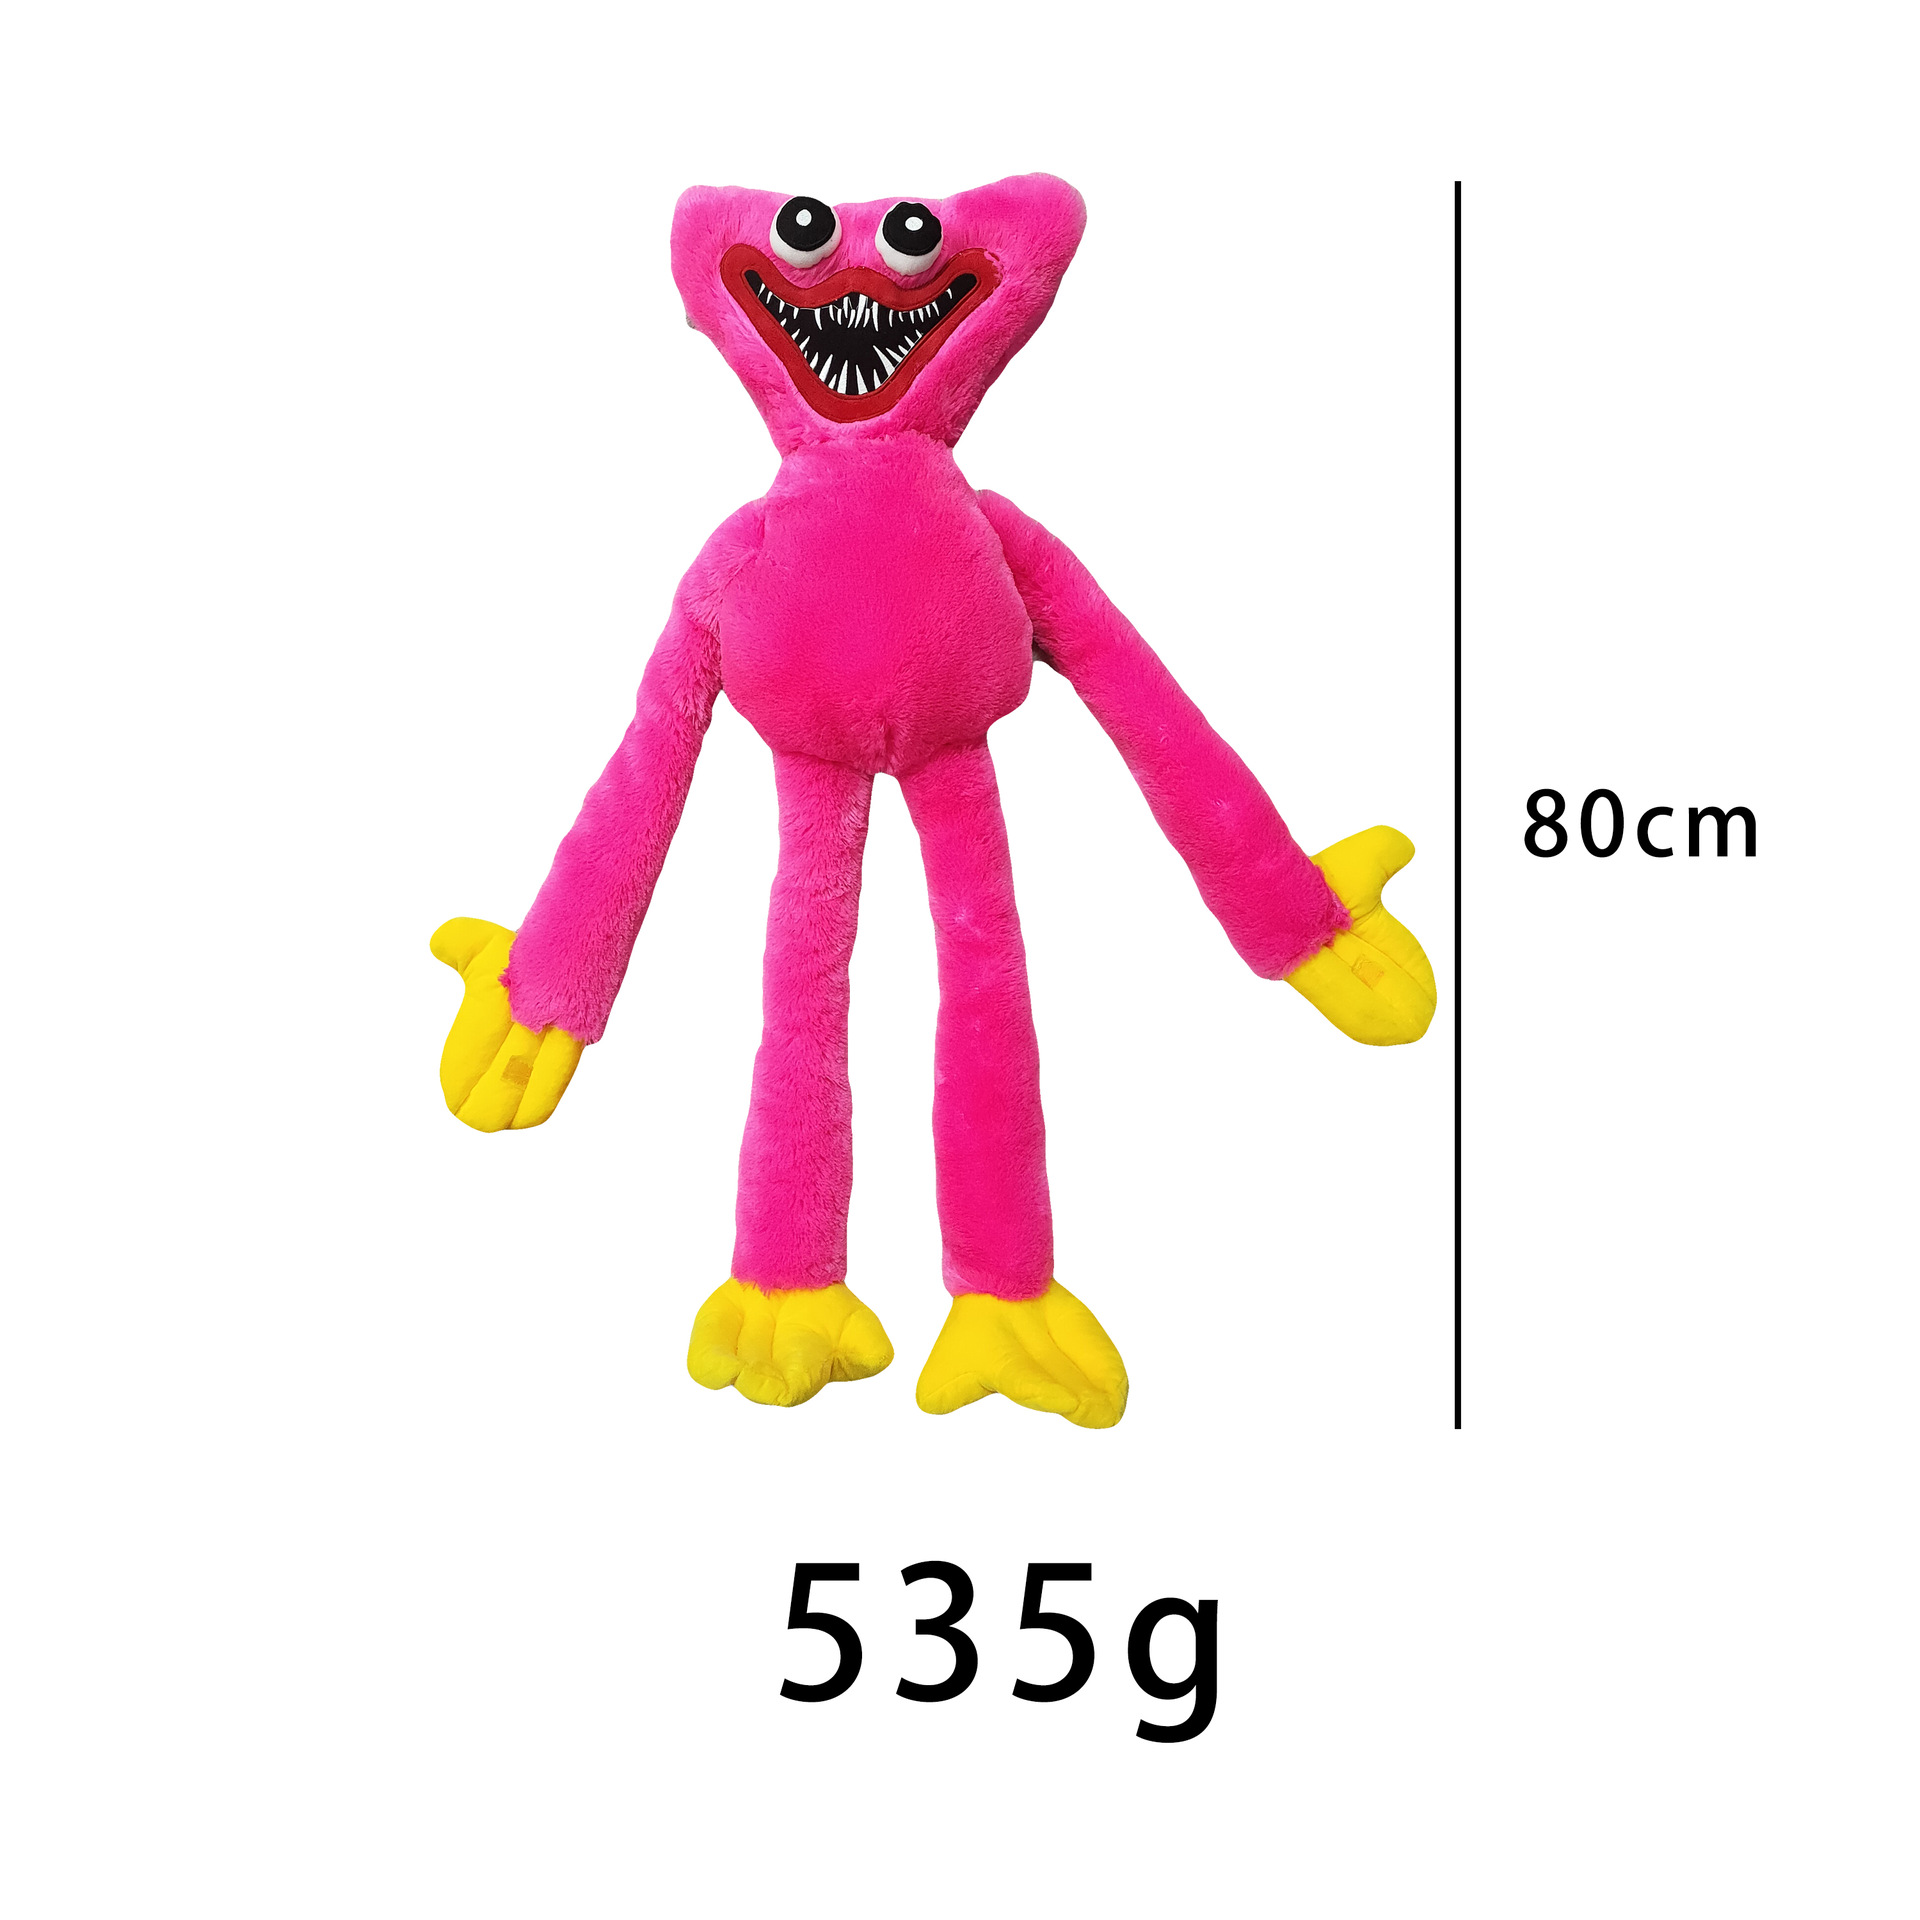 PLAYTIME Co. - HUGE Plush (32 Tall Plush, Series 1) [OFFICIALLY